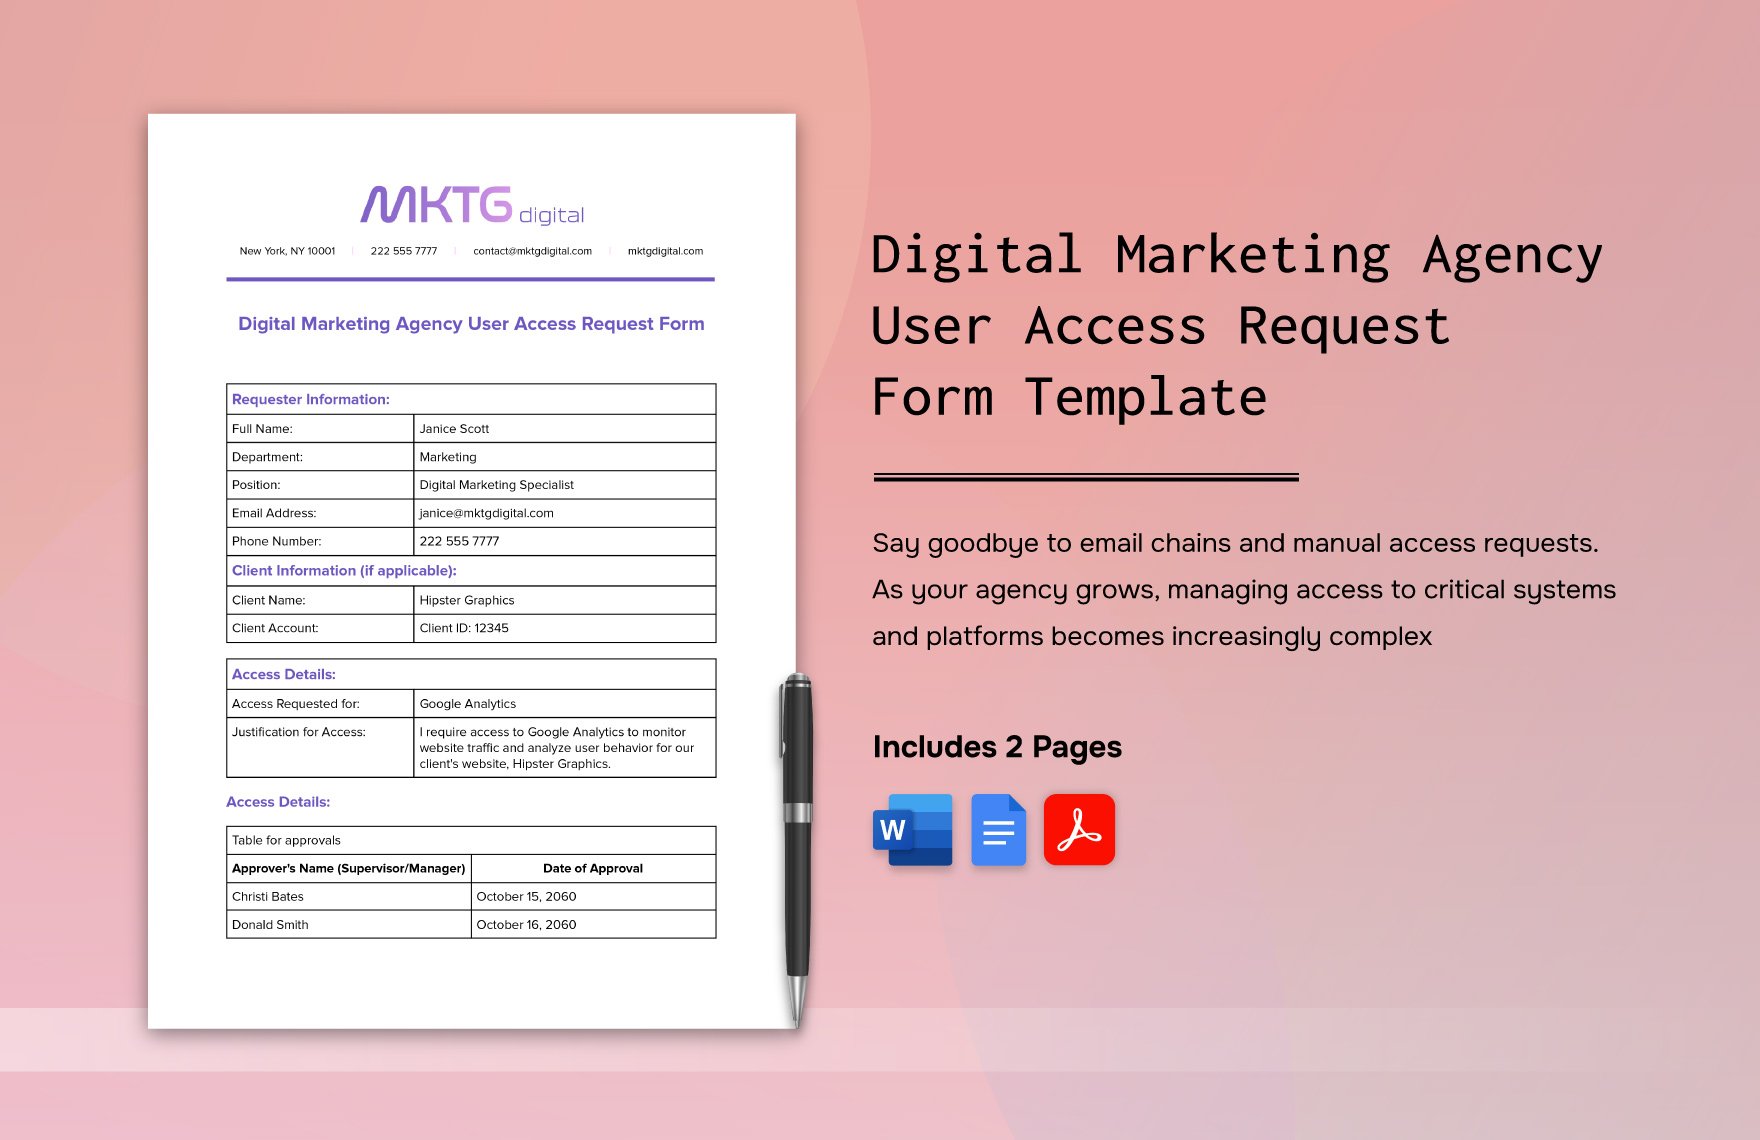 Digital Marketing Agency User Access Request Form Template